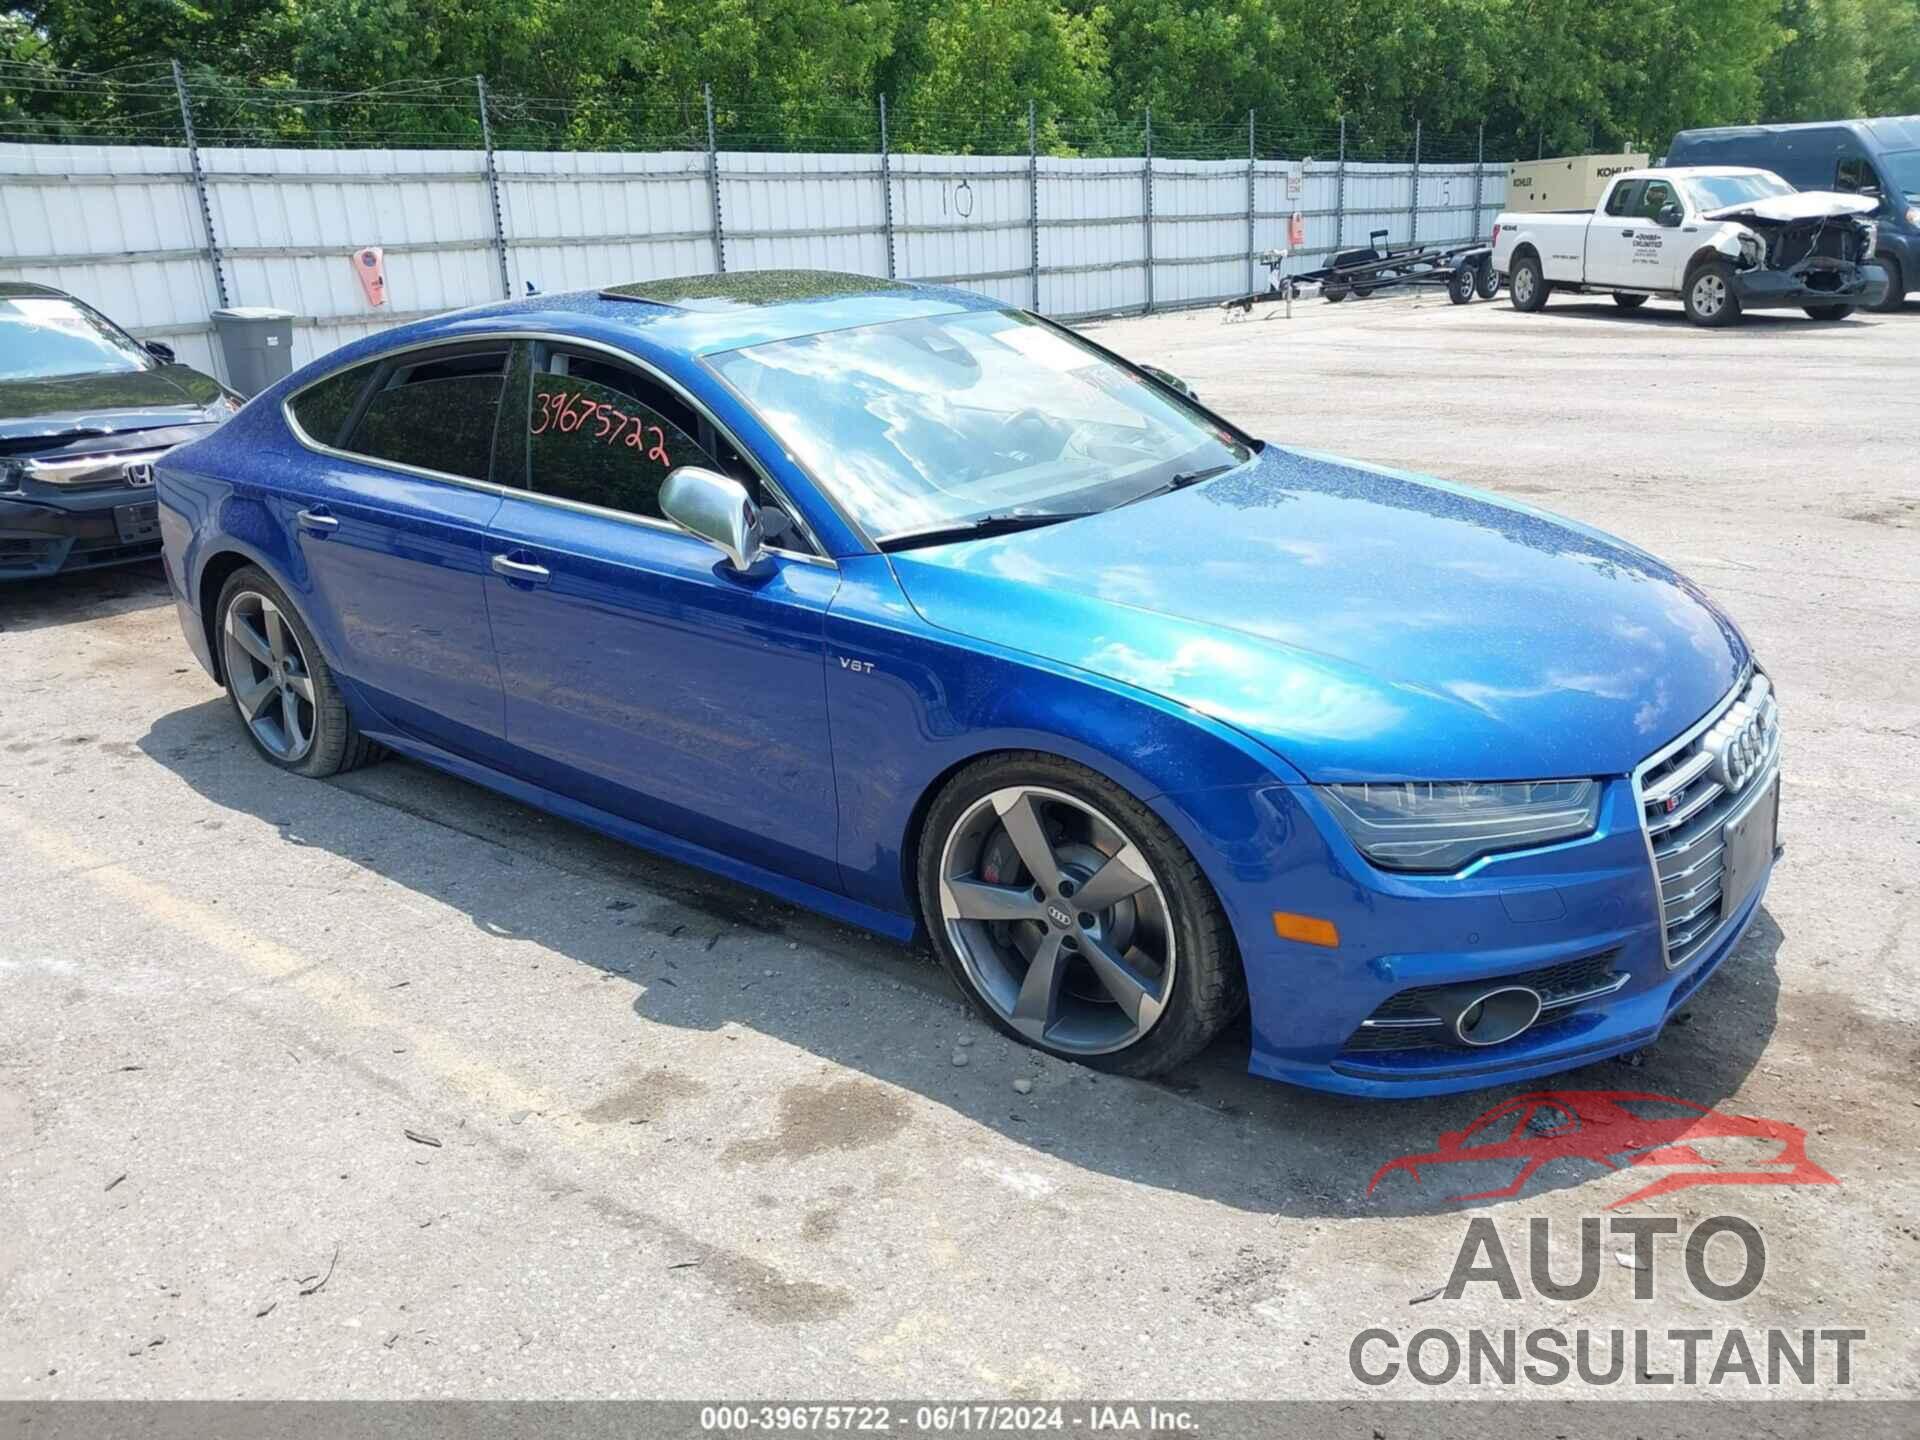 AUDI S7 2016 - WAUW2AFC0GN035594